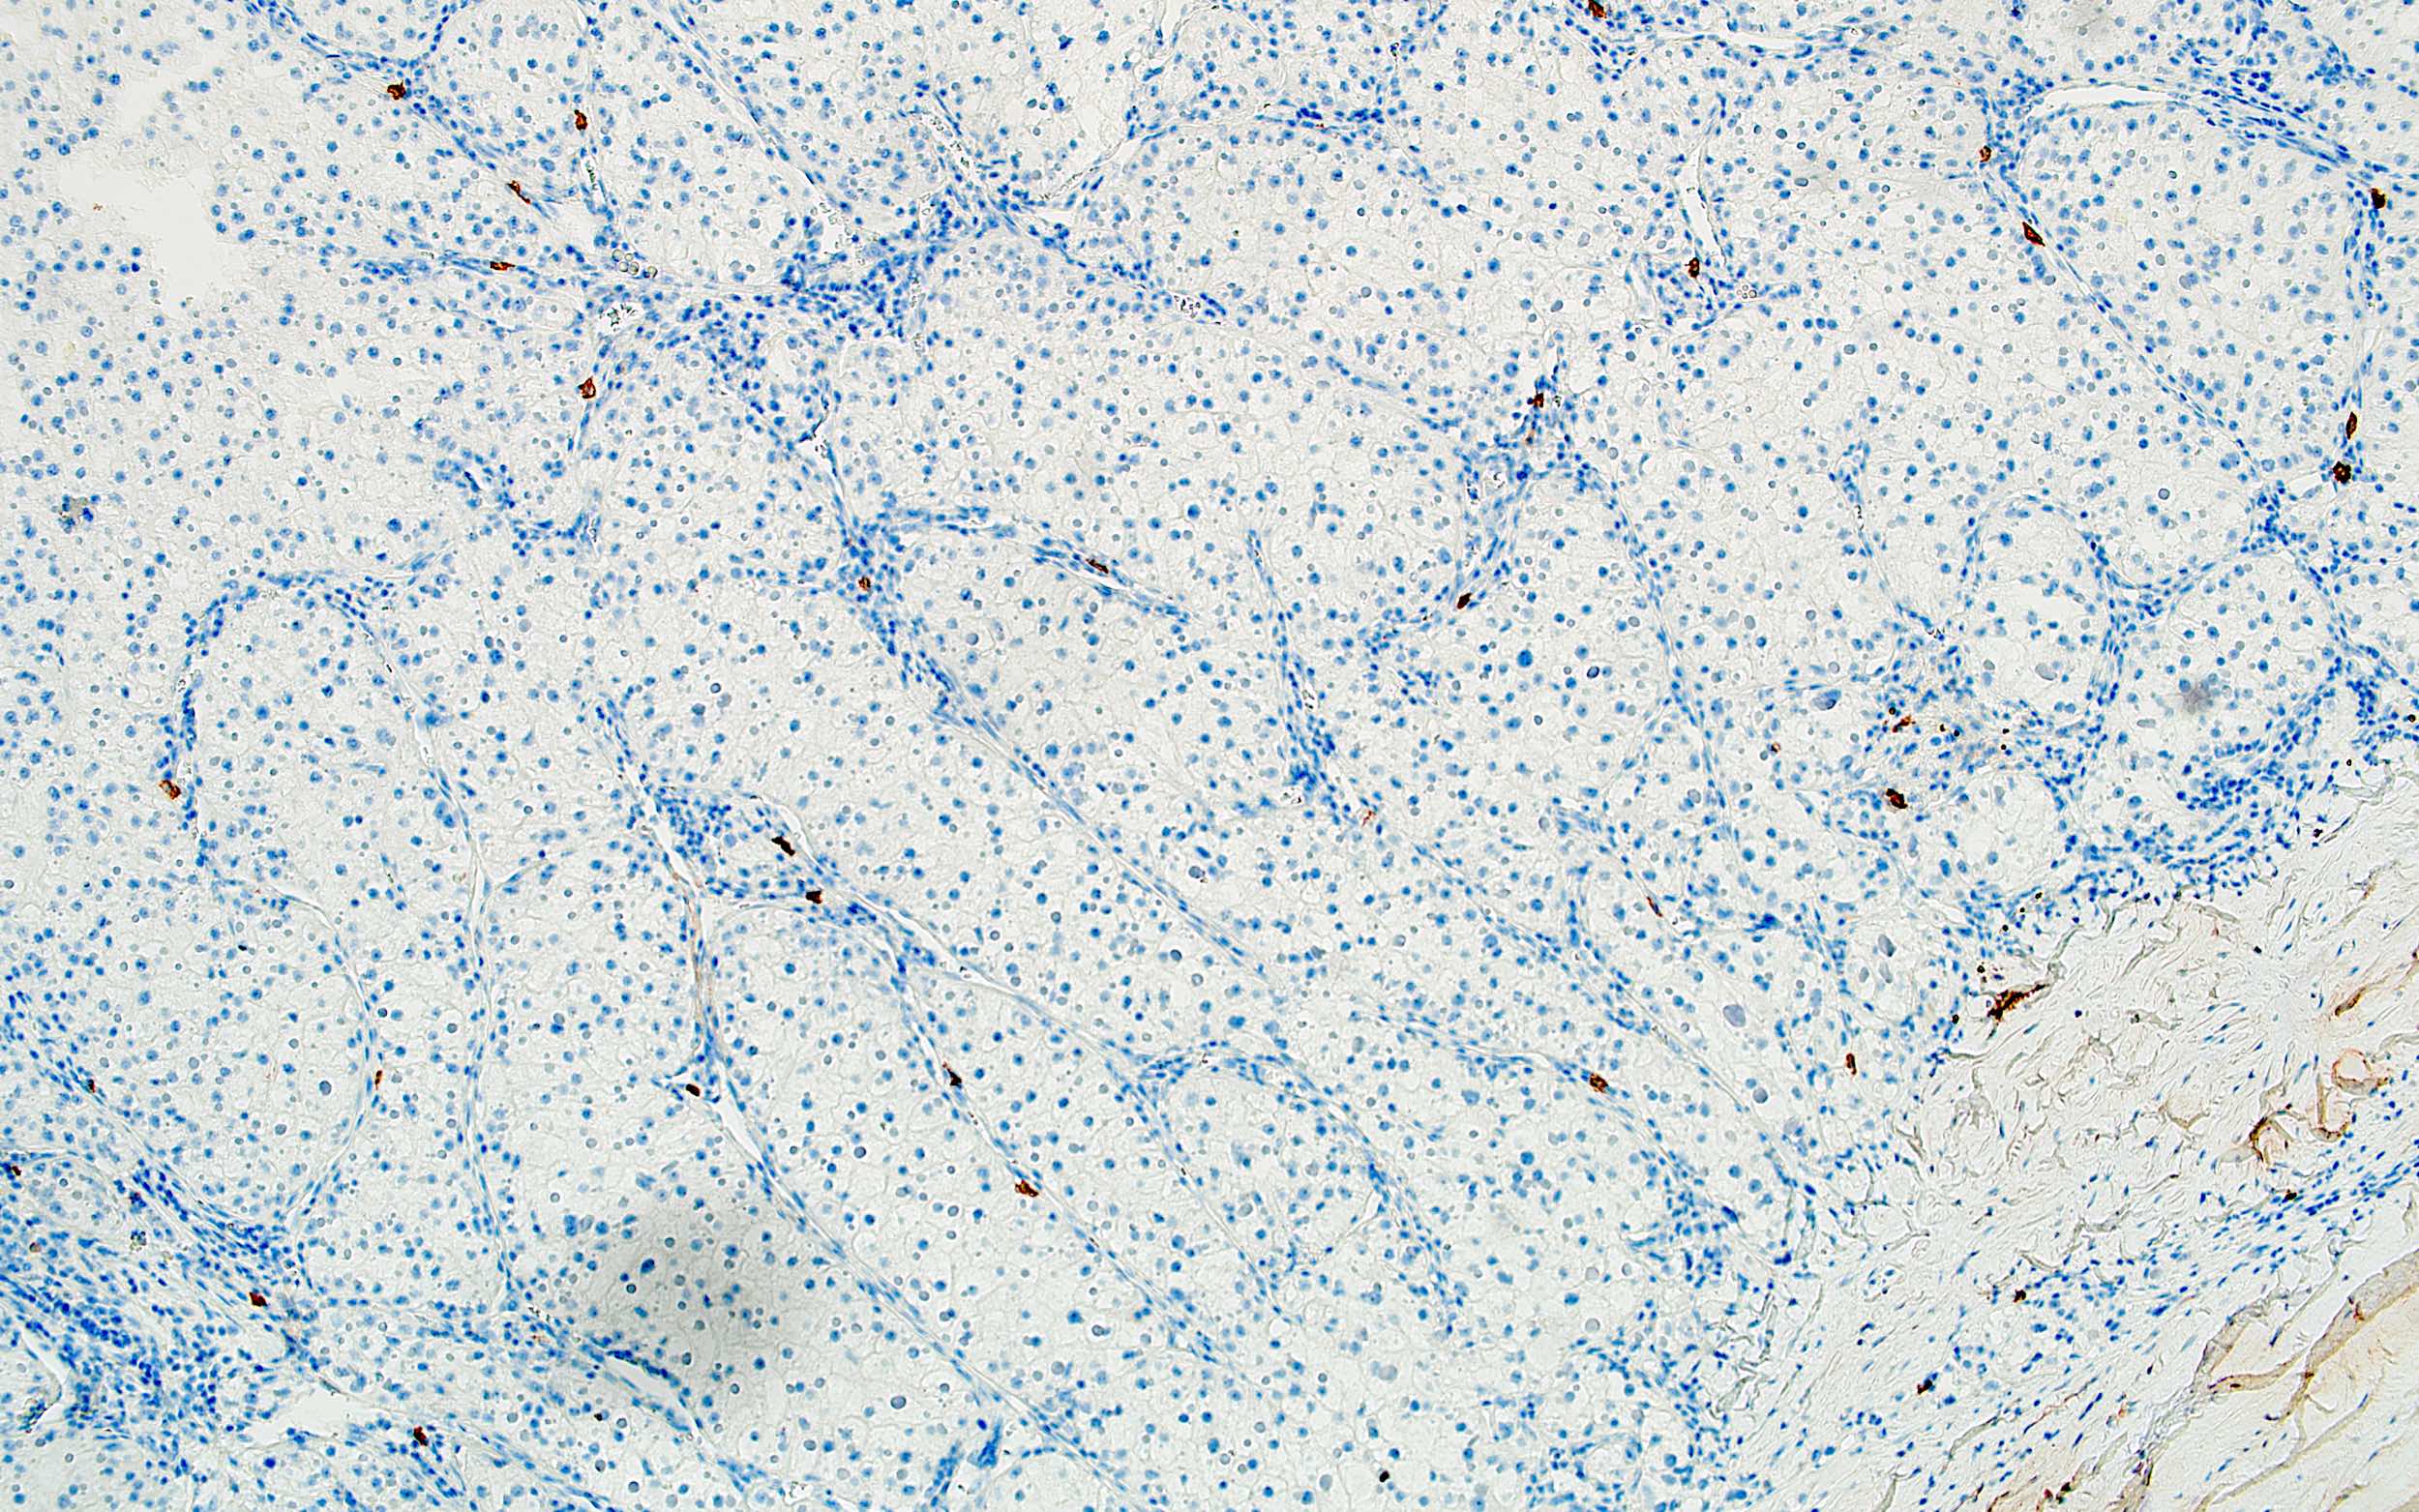 Atypical cells of CCRCC, CD117-